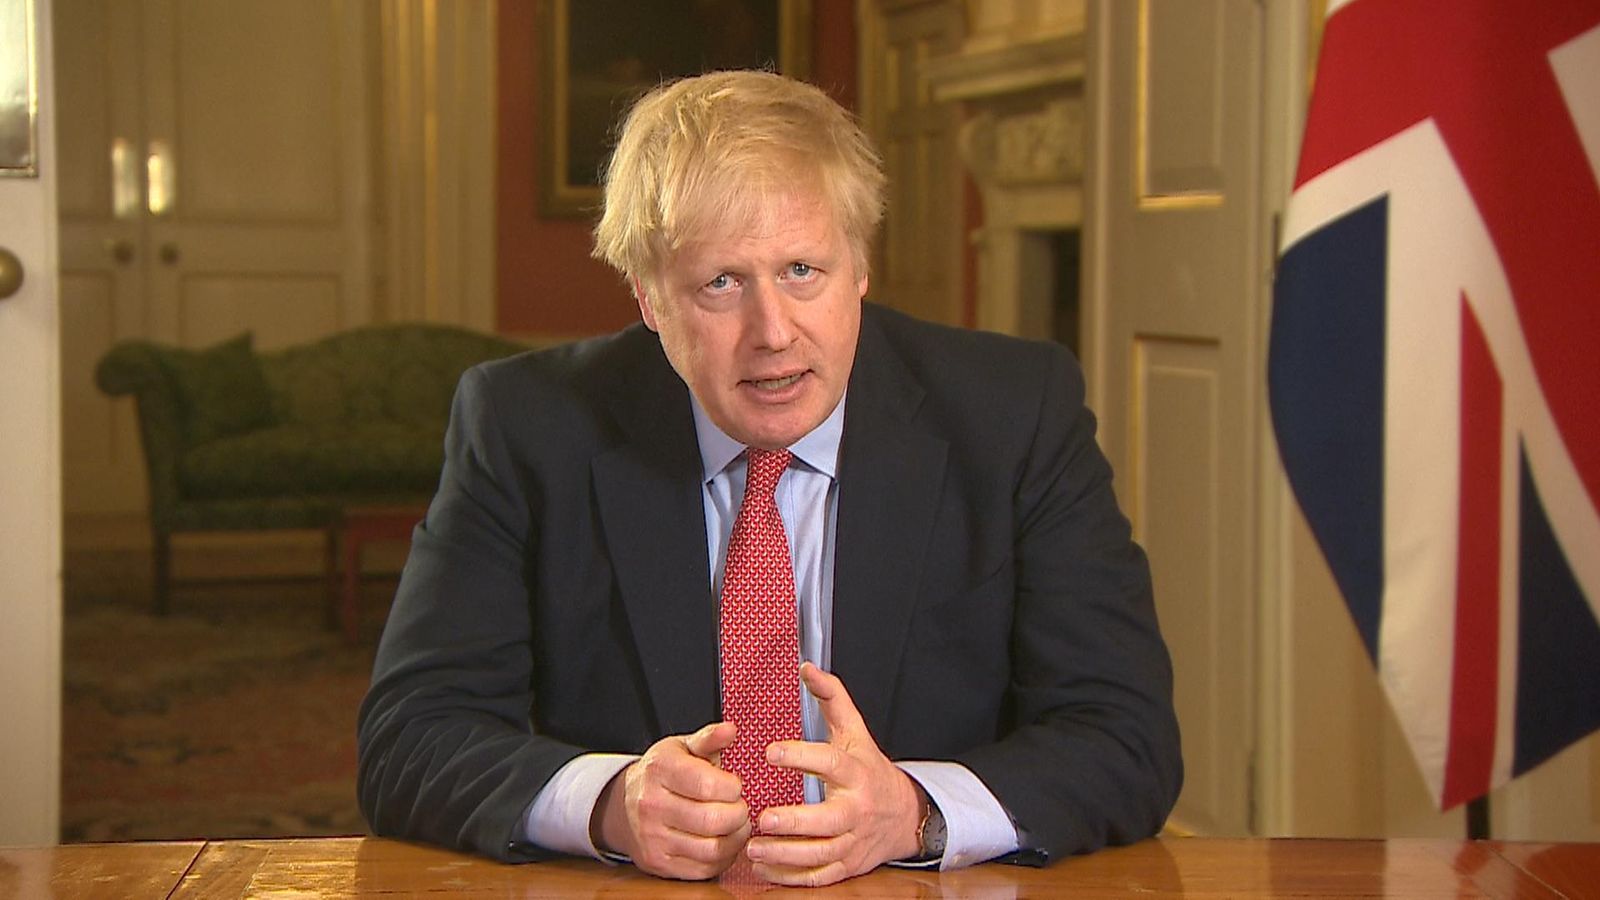 COVID inquiry: Boris Johnson says he has reflected on whether lockdowns 'did more harm than good'